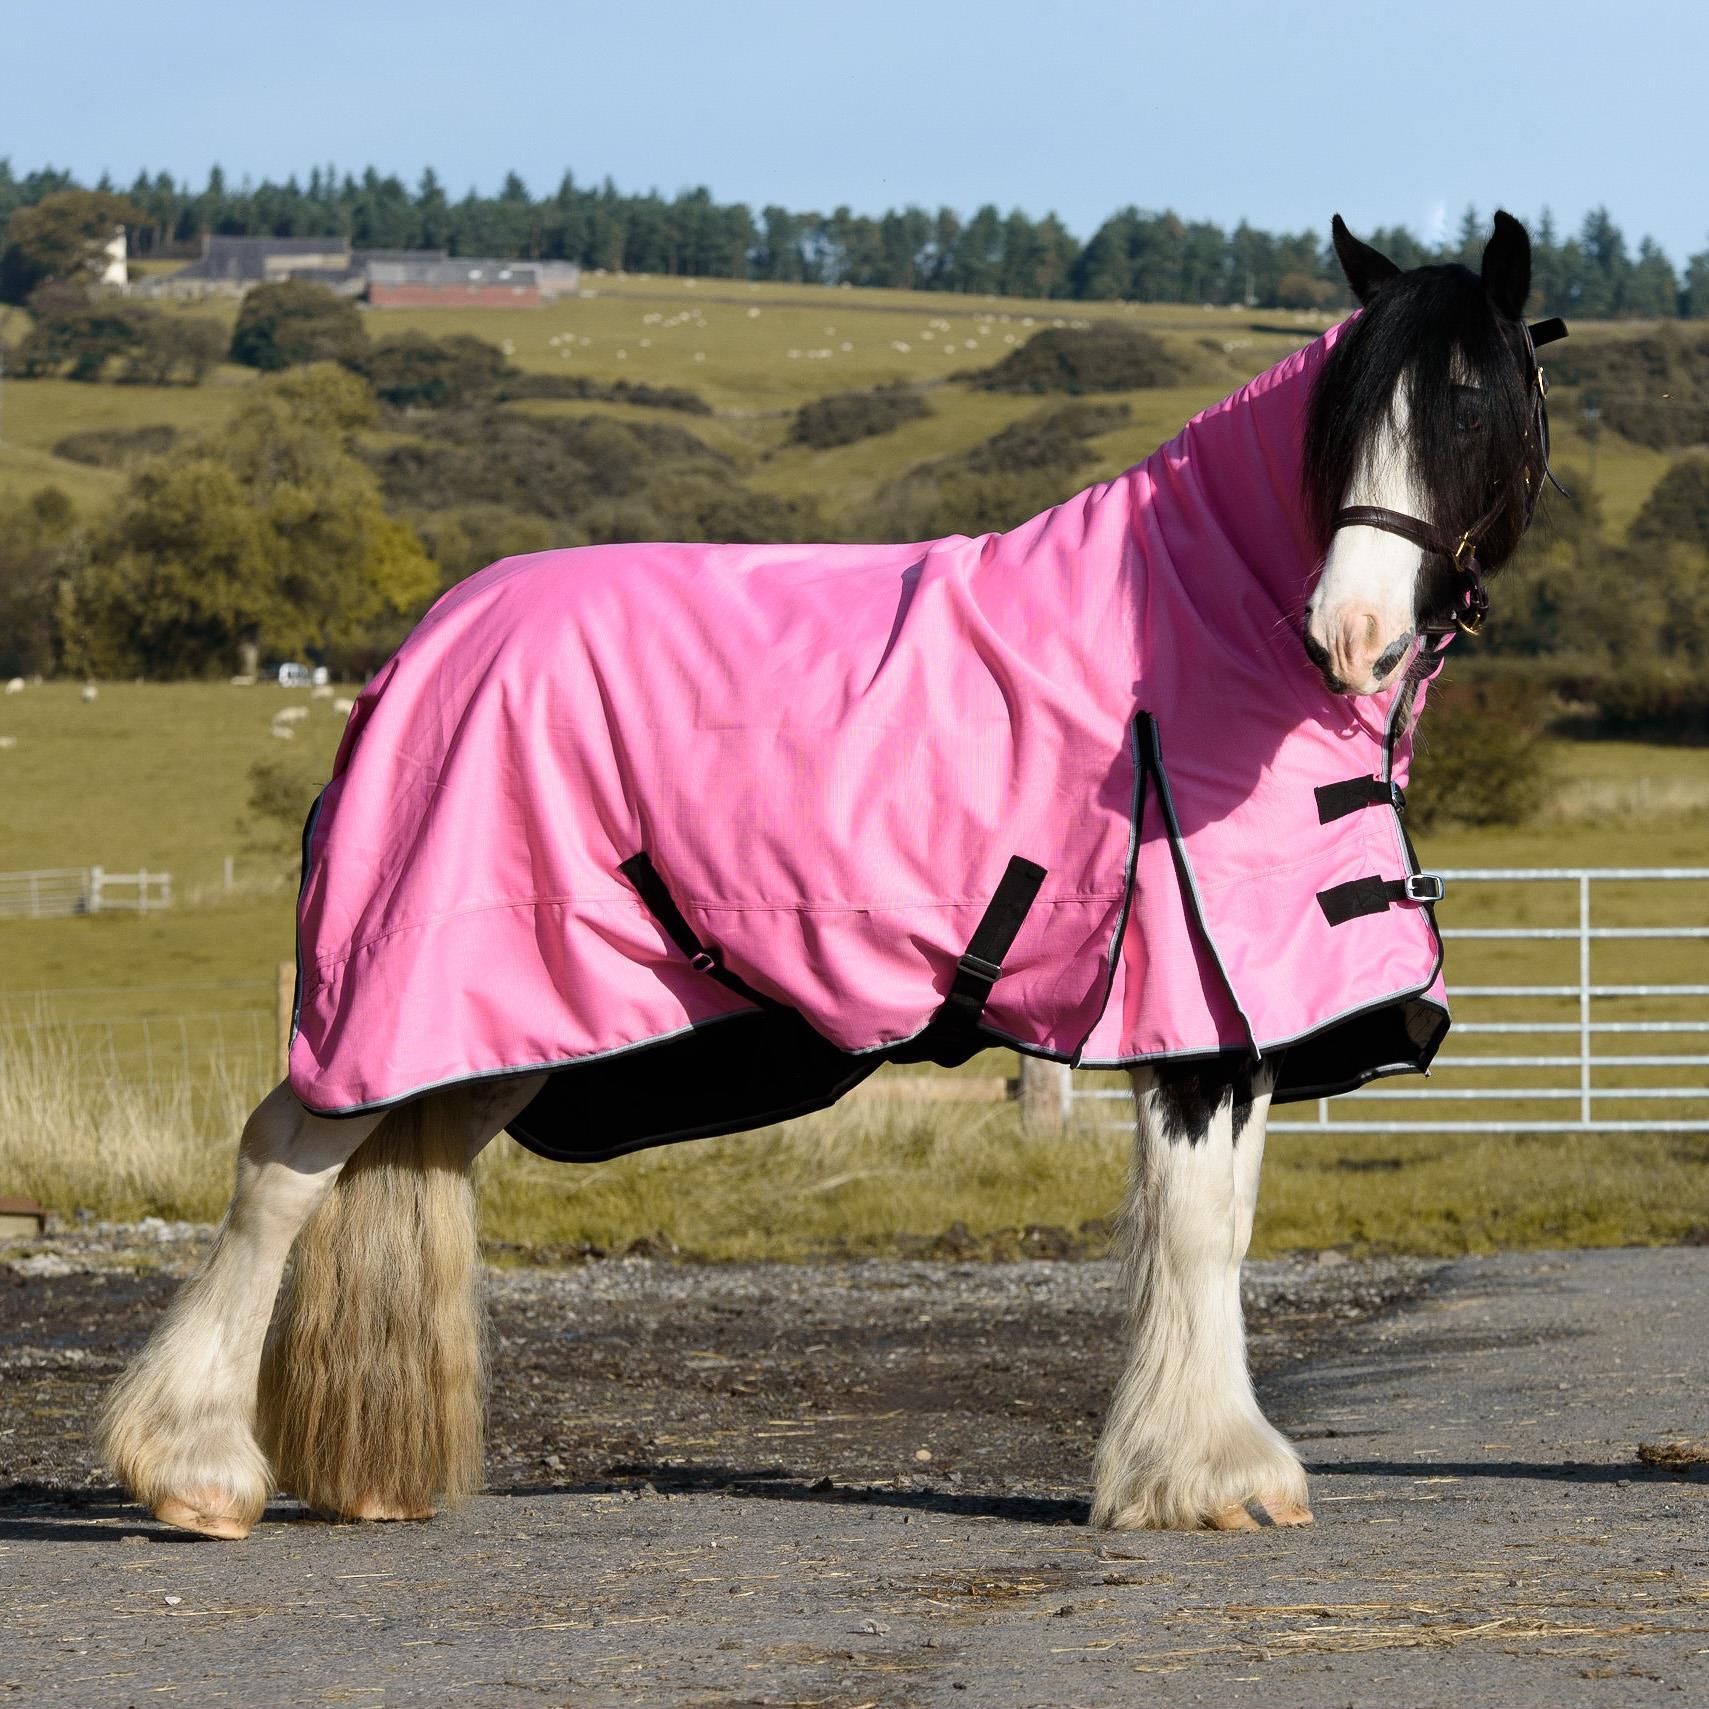 1200D Outdoor Winter Turnout Horse Rugs 100G Fill Combo Neck Teflon Pink 5'3-6'9 - Tack24